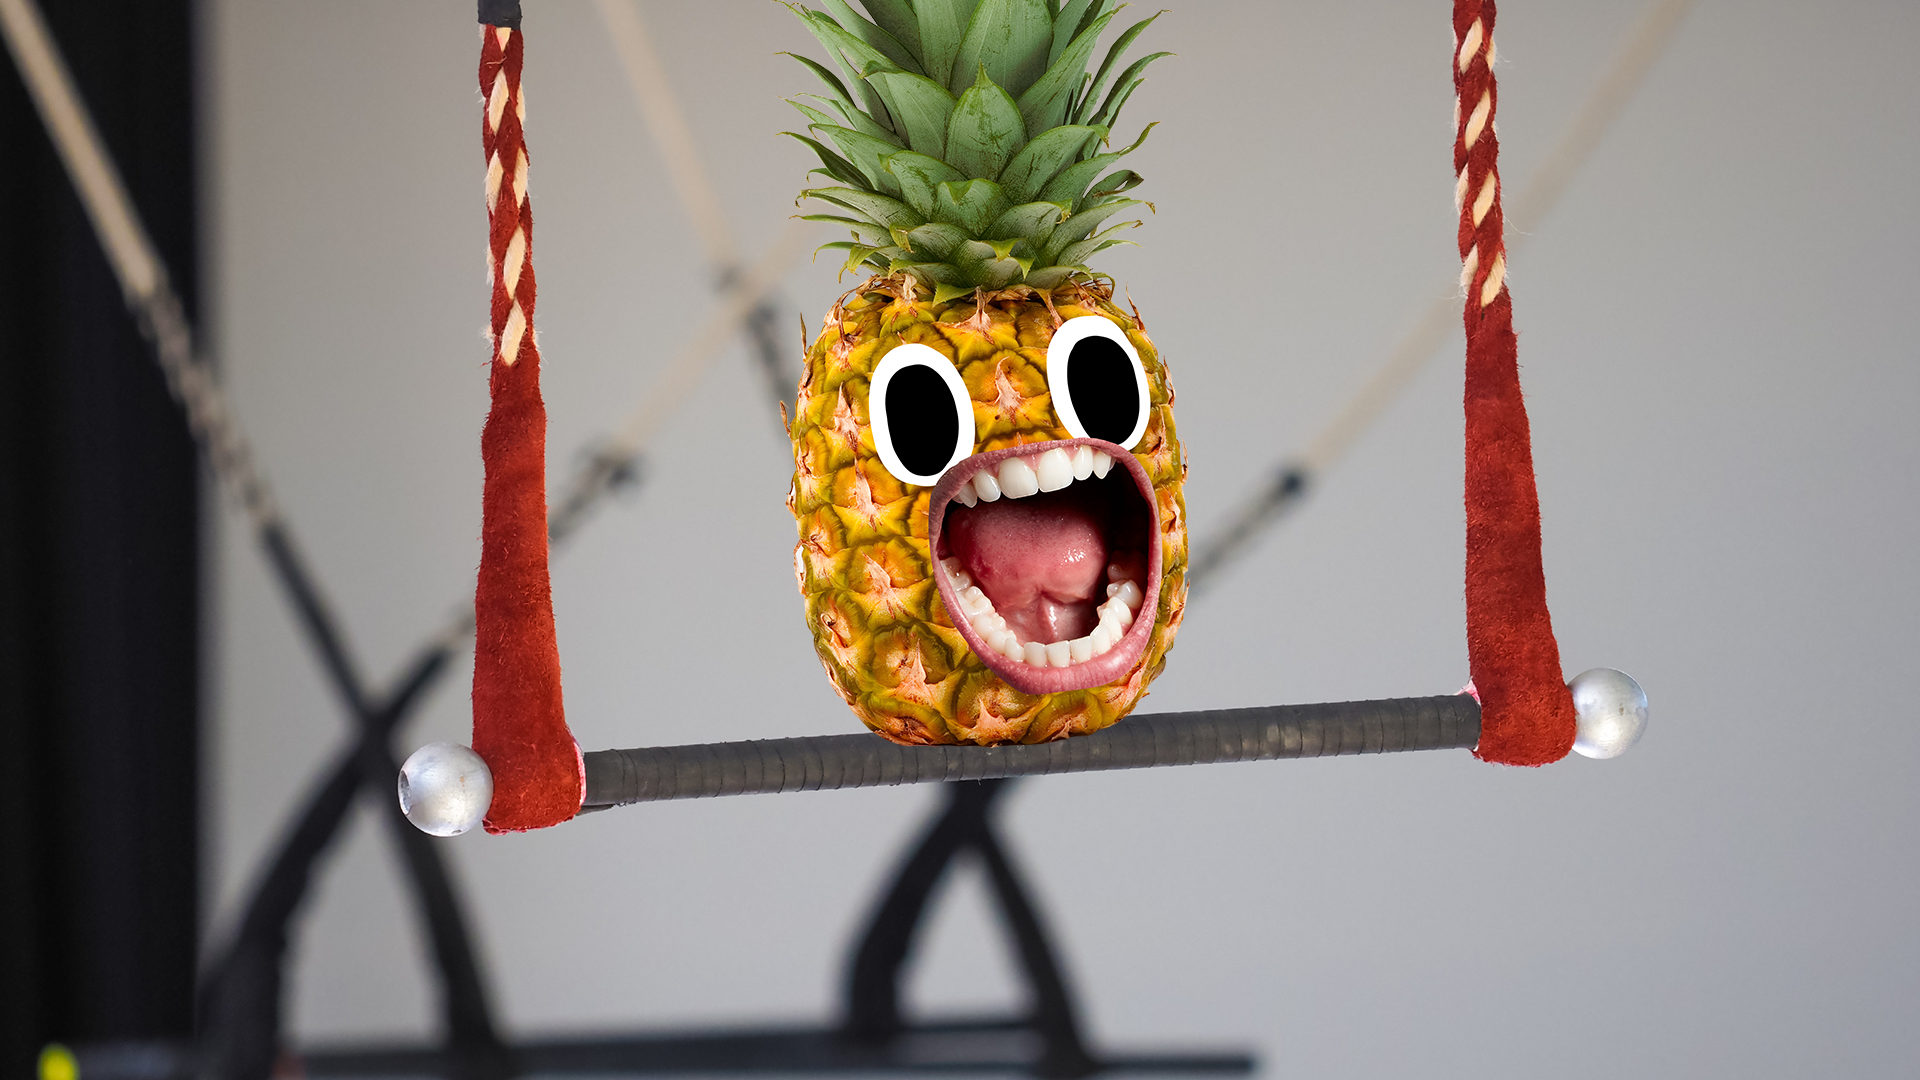 Pinapple on a trapeze, geddit?